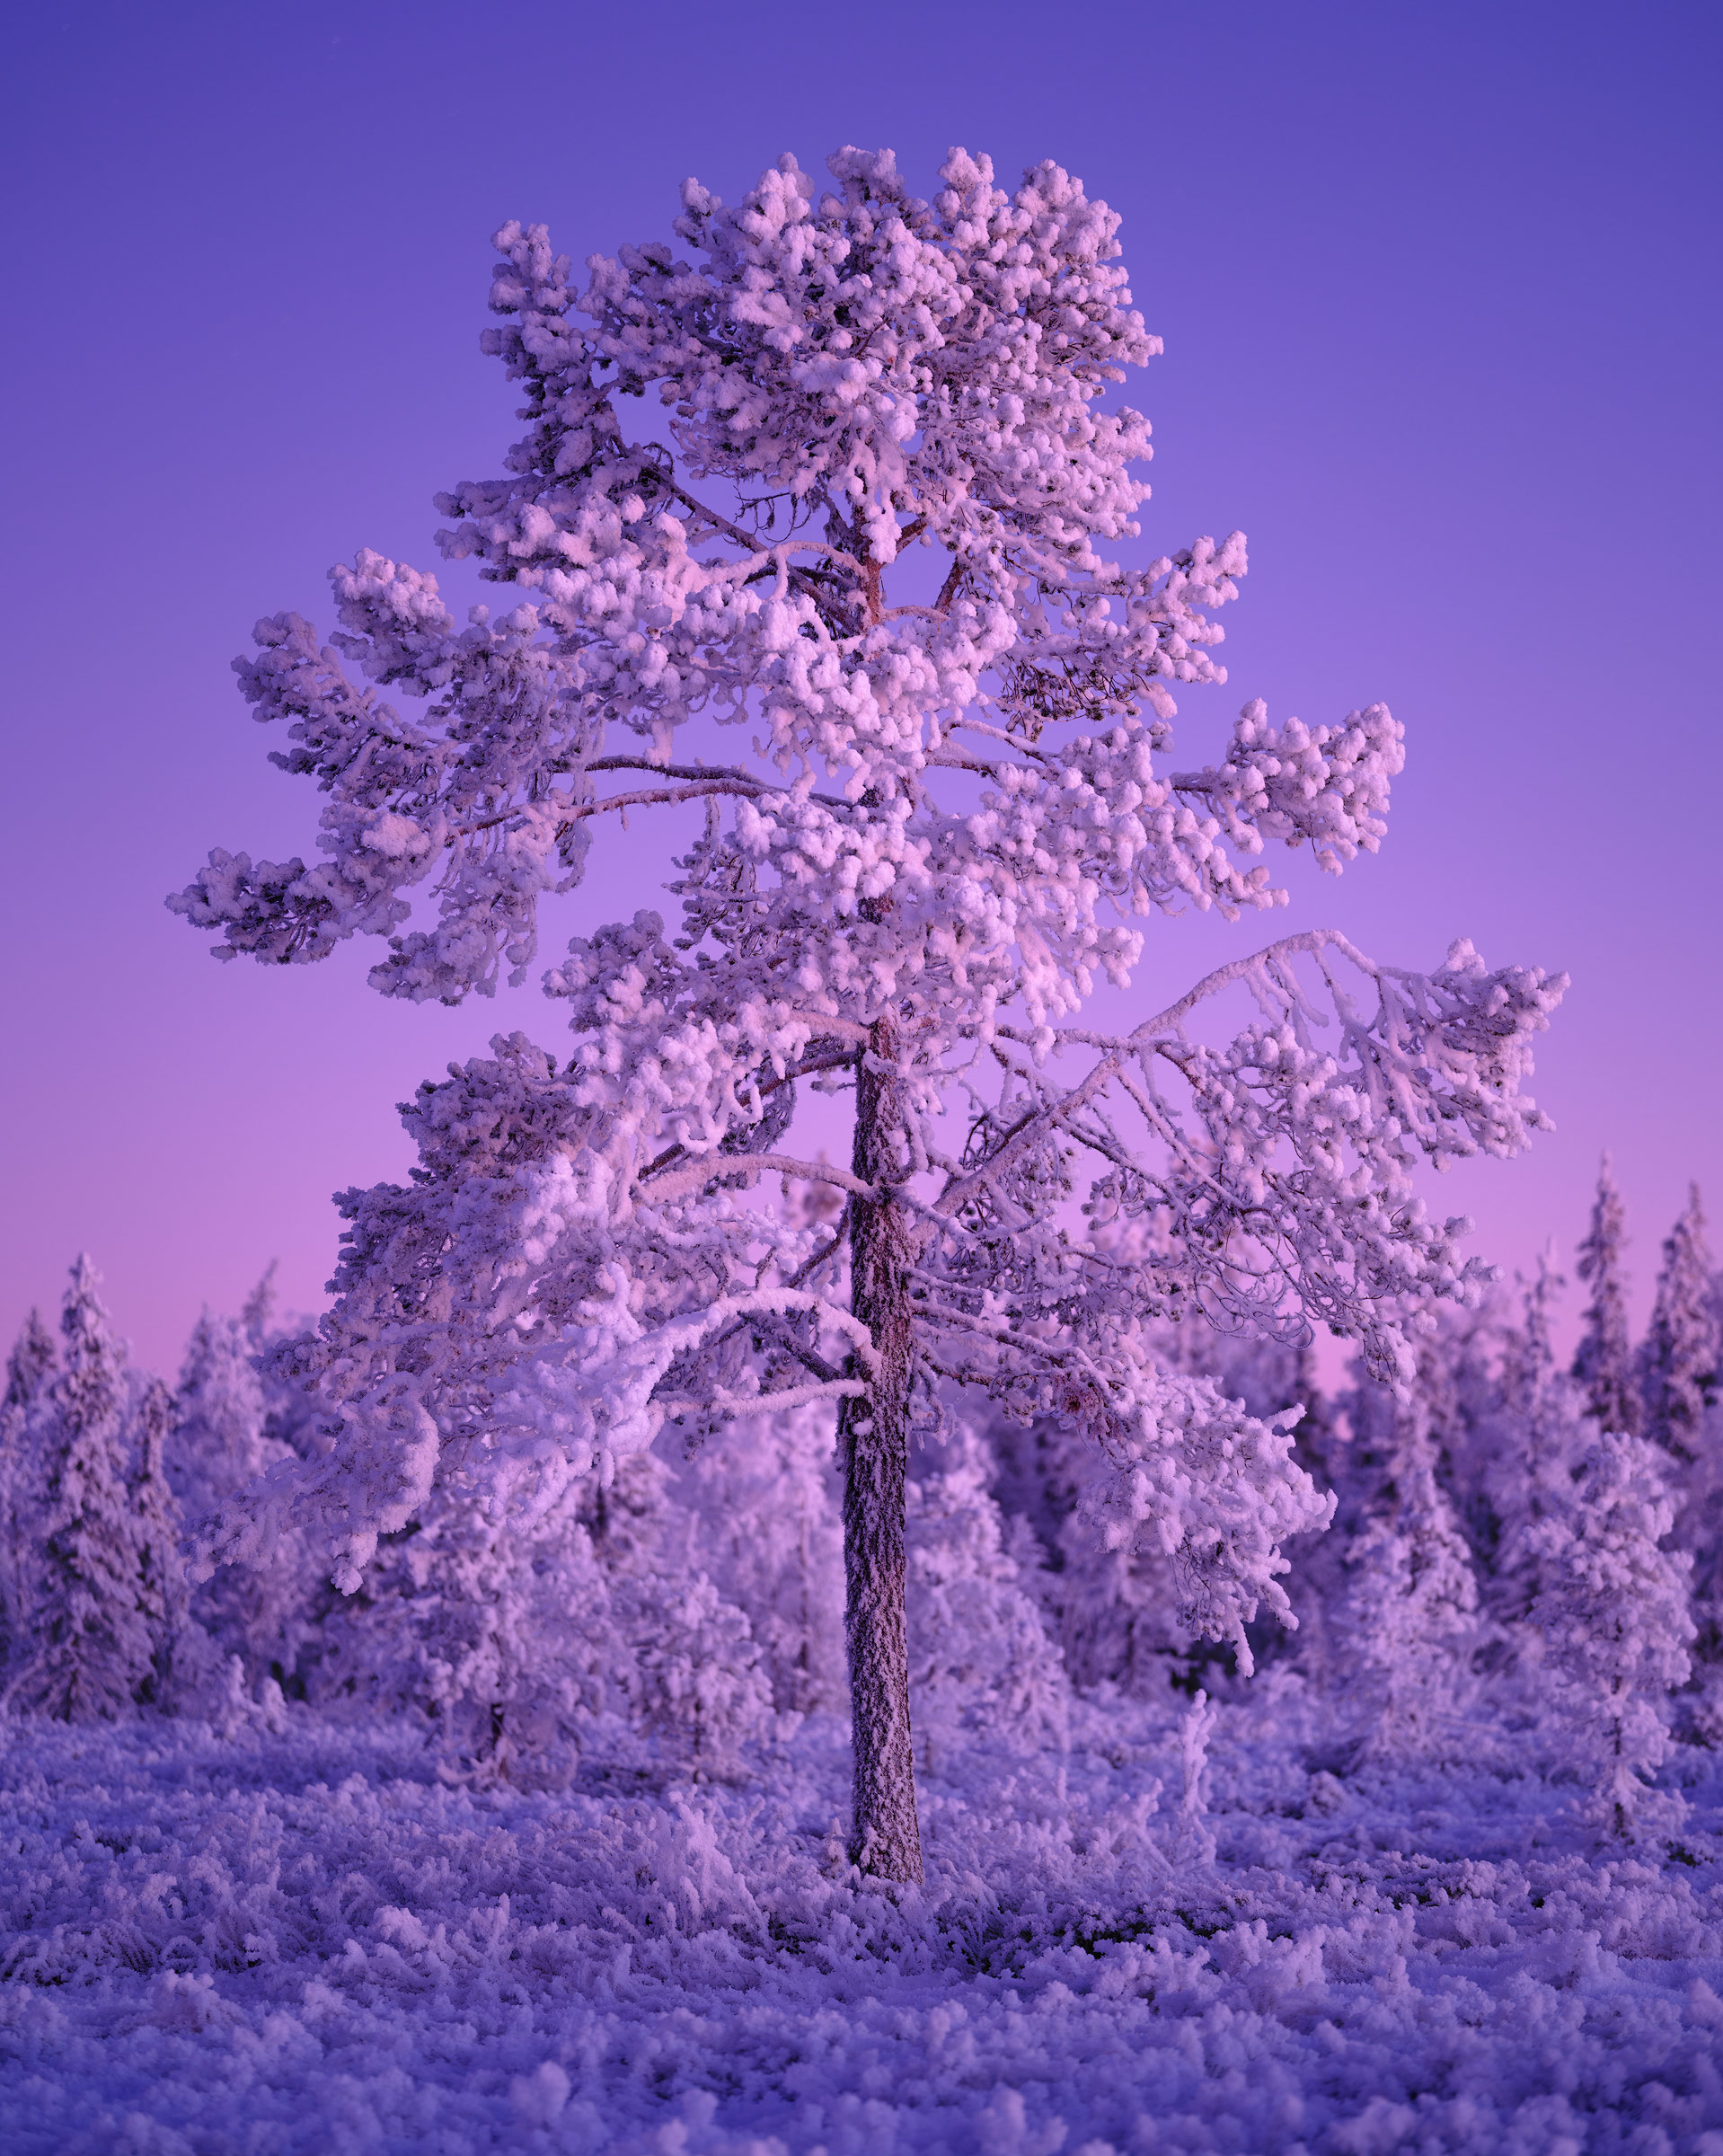 Twilight in the winter forests of Muddus National Park, Lapland, Sweden.